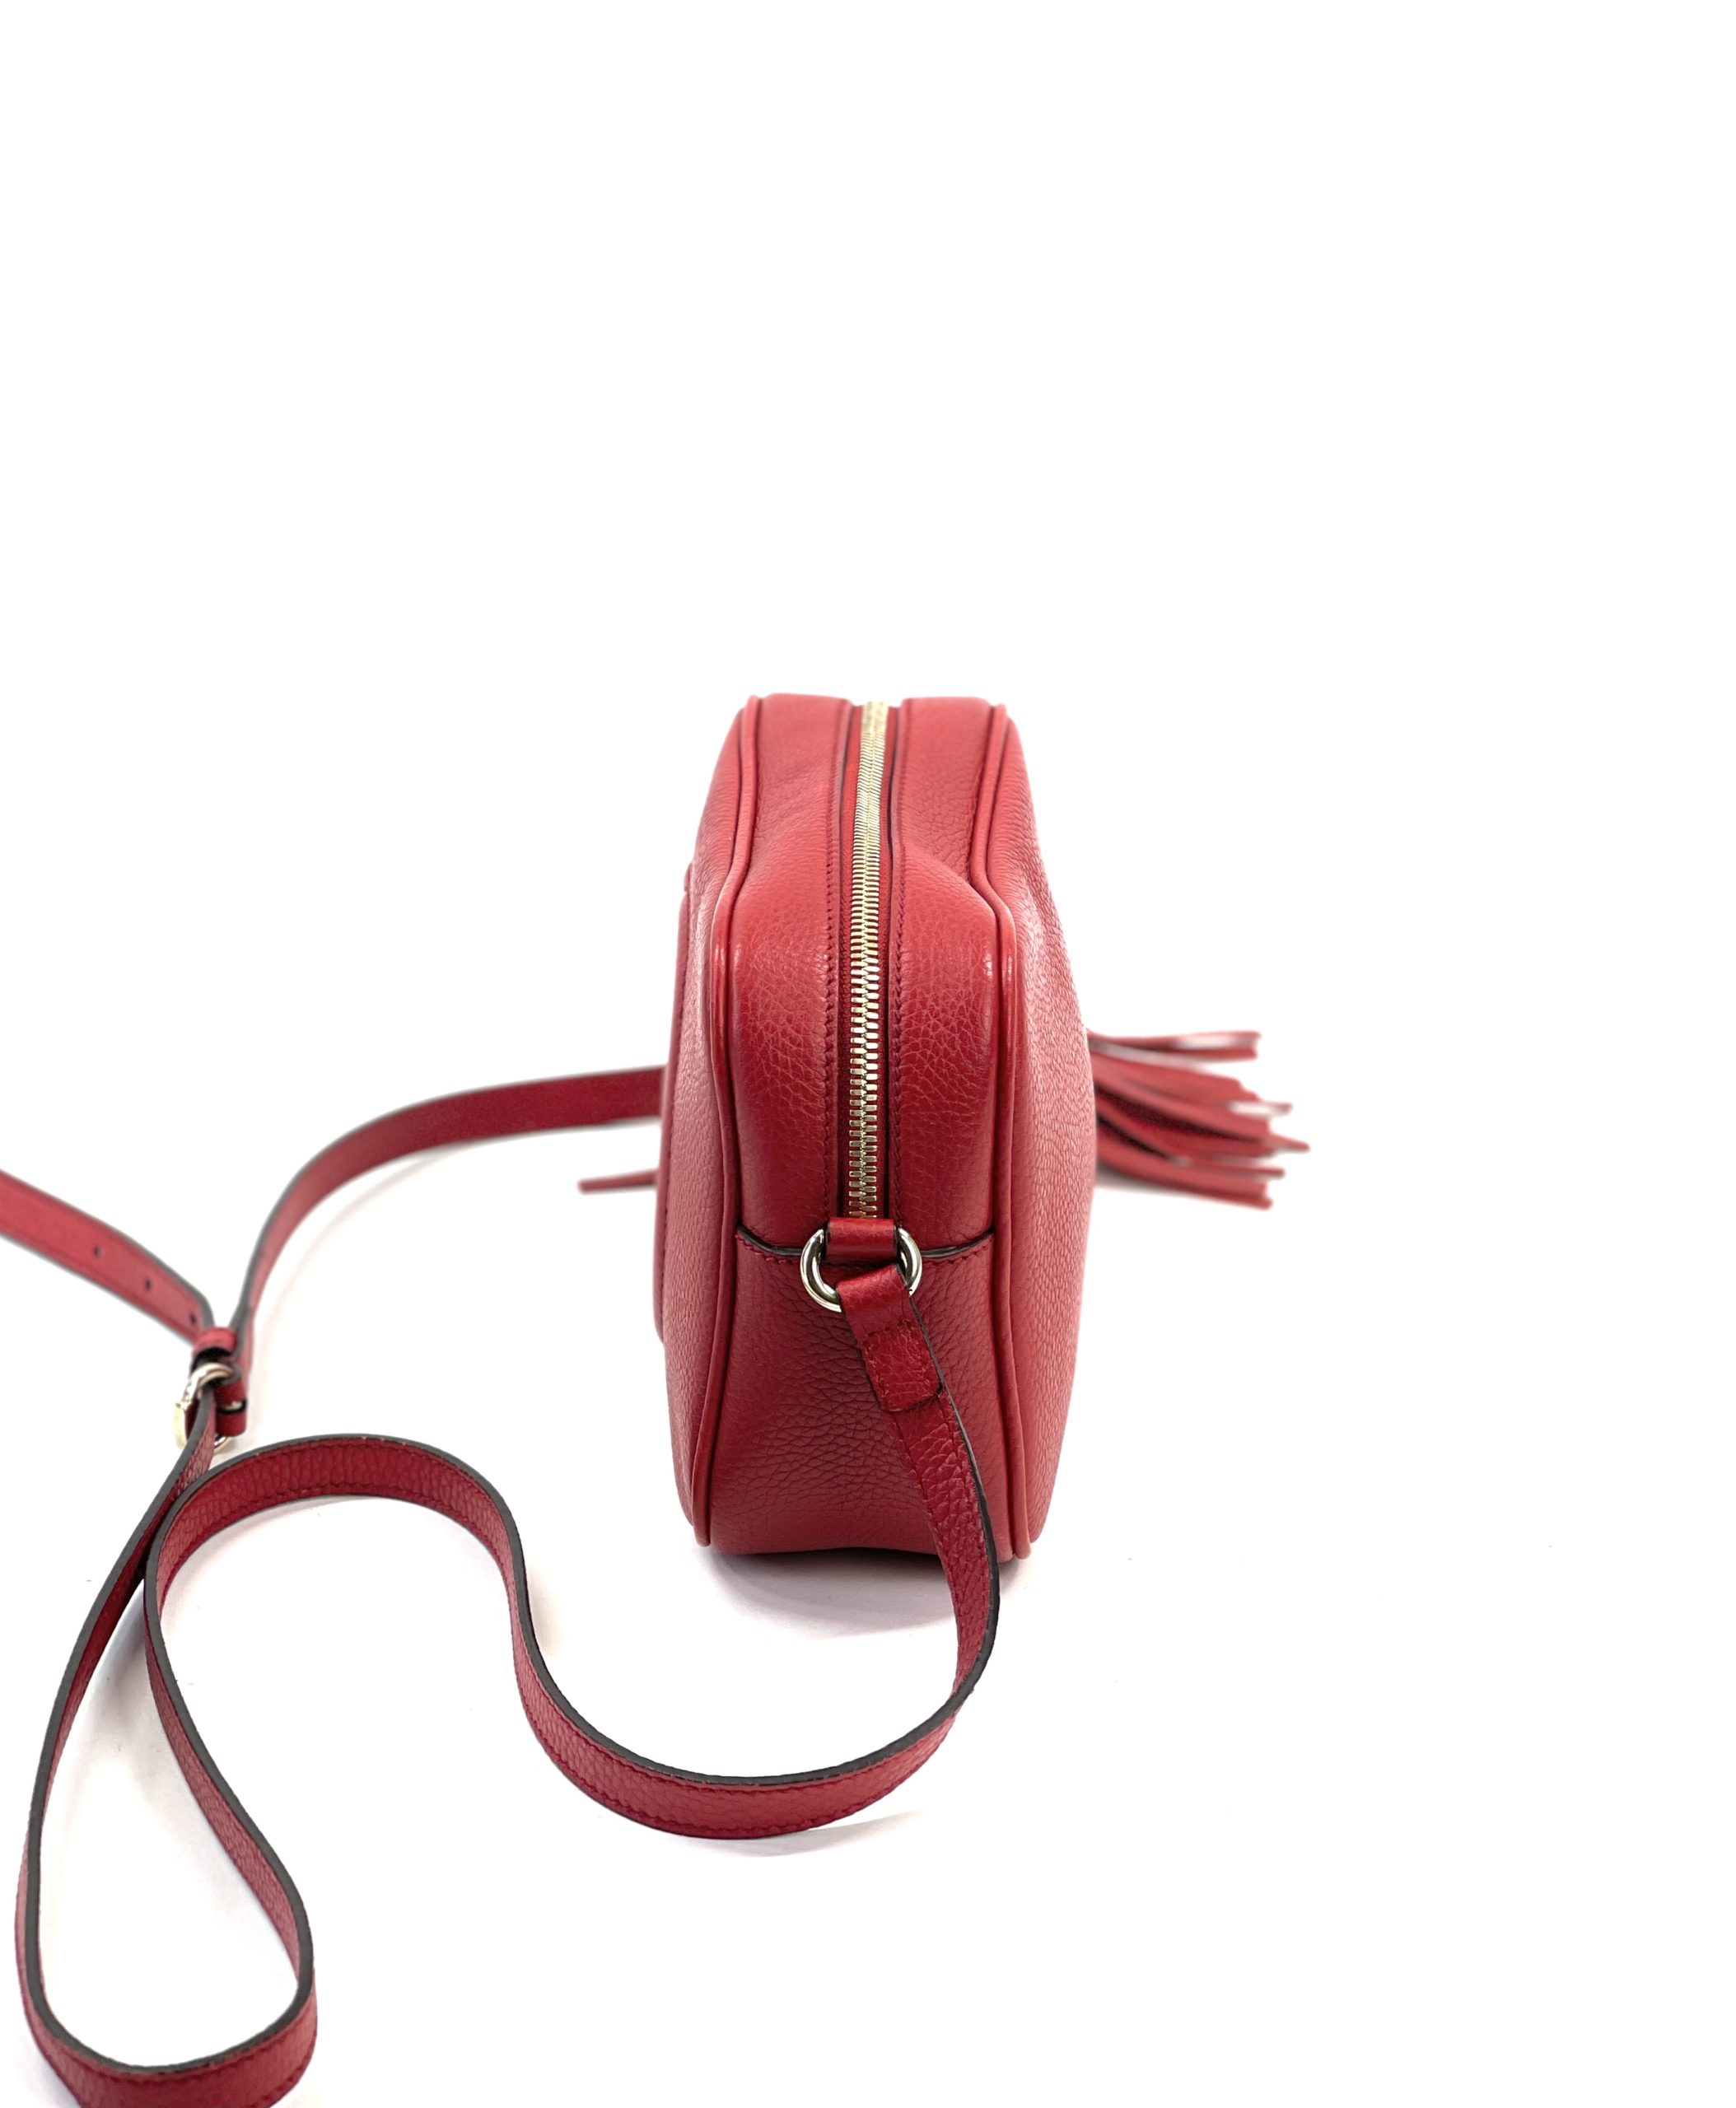 Soho leather crossbody bag Gucci Red in Leather - 11401226